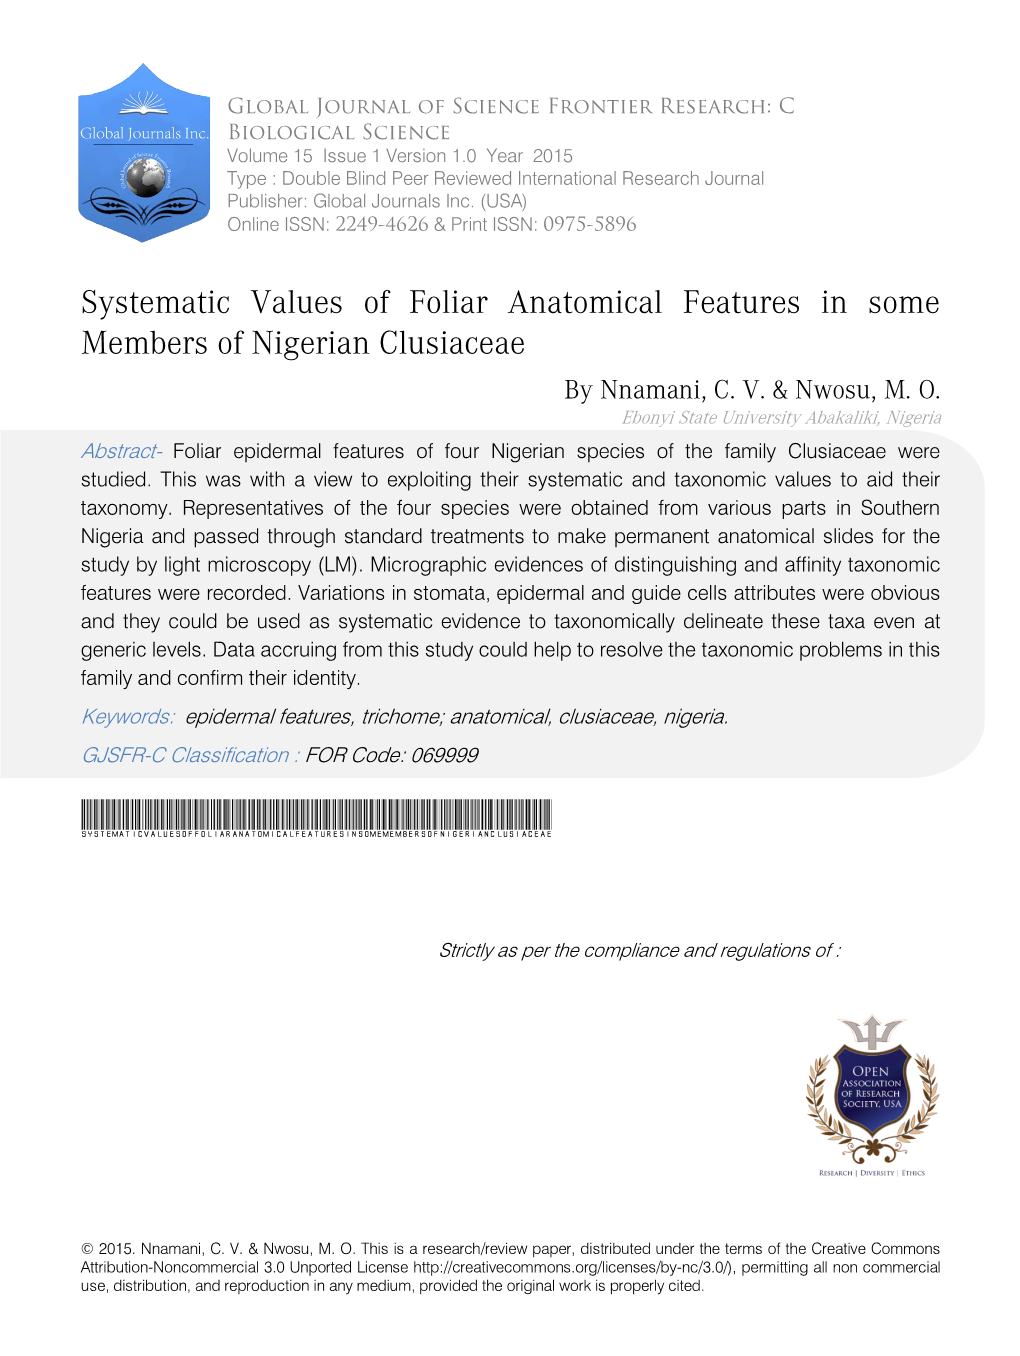 Systematic Values of Foliar Anatomical Features in Some Members of Nigerian Clusiaceae by Nnamani, C